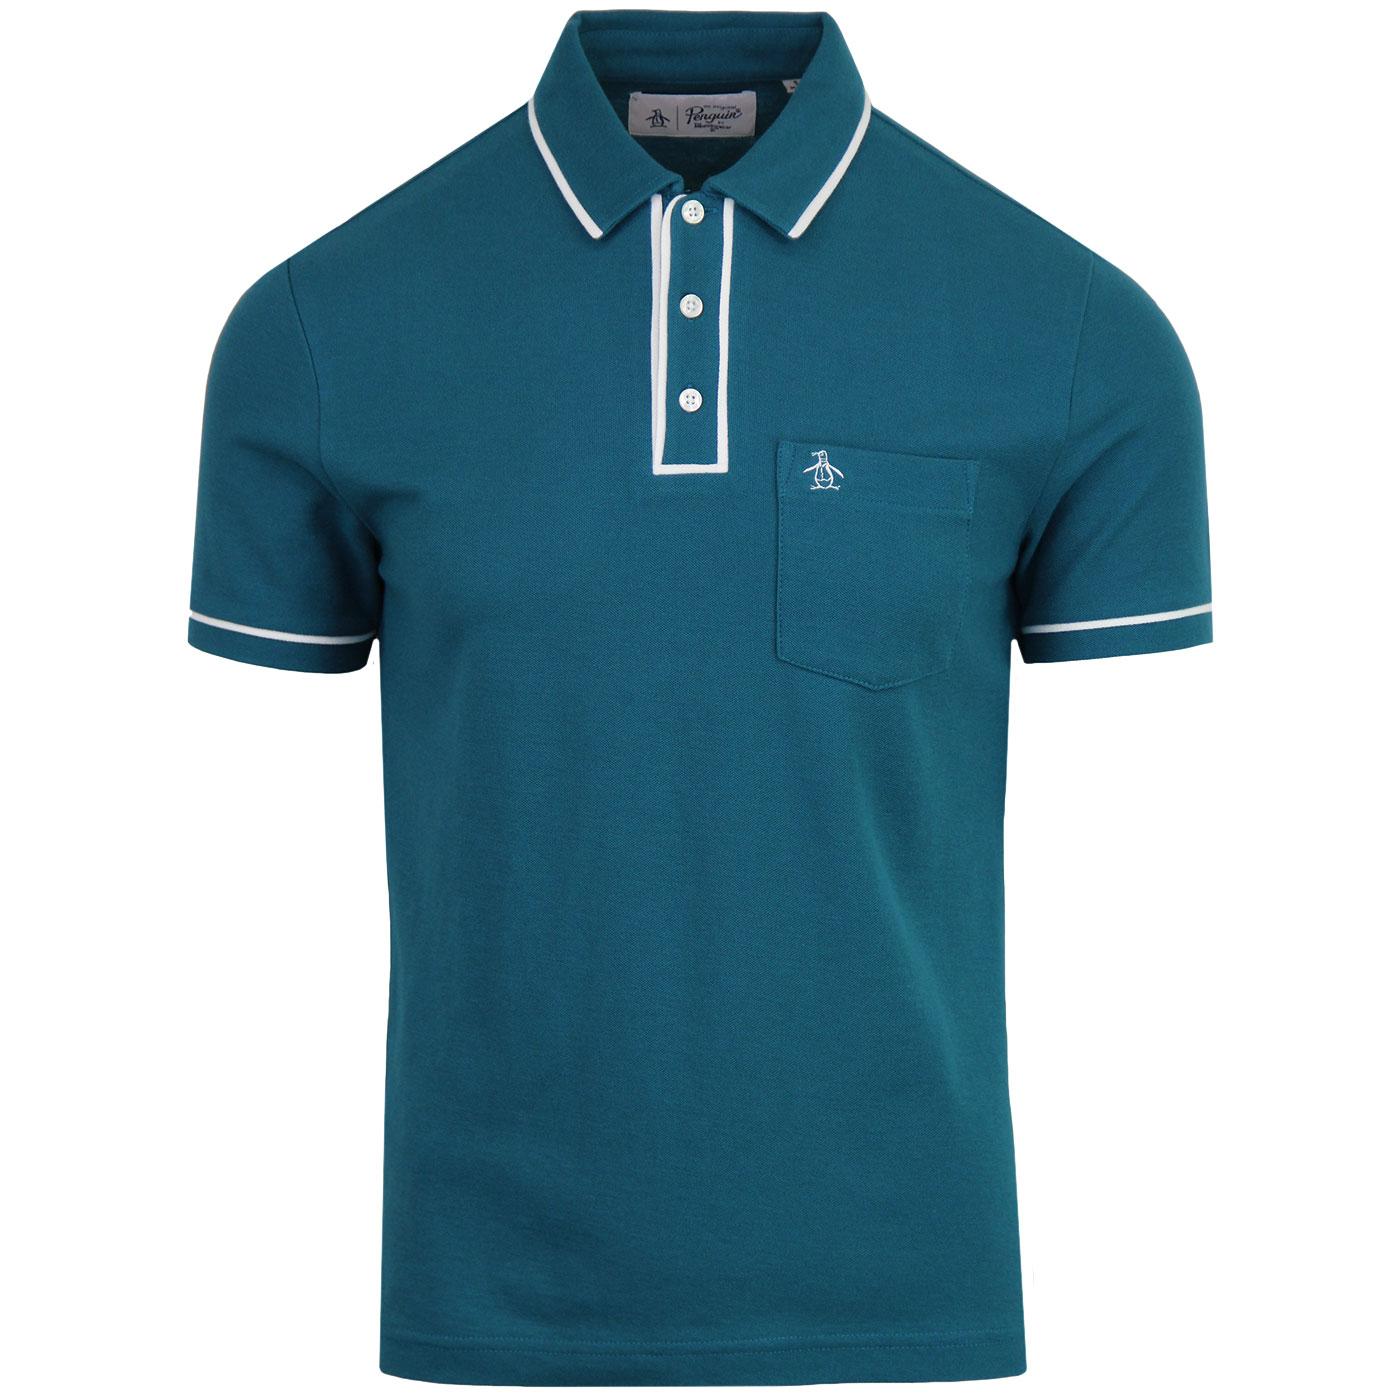 ORIGINAL PENGUIN Earl Retro Mod Tipped Polo in Dragonfly